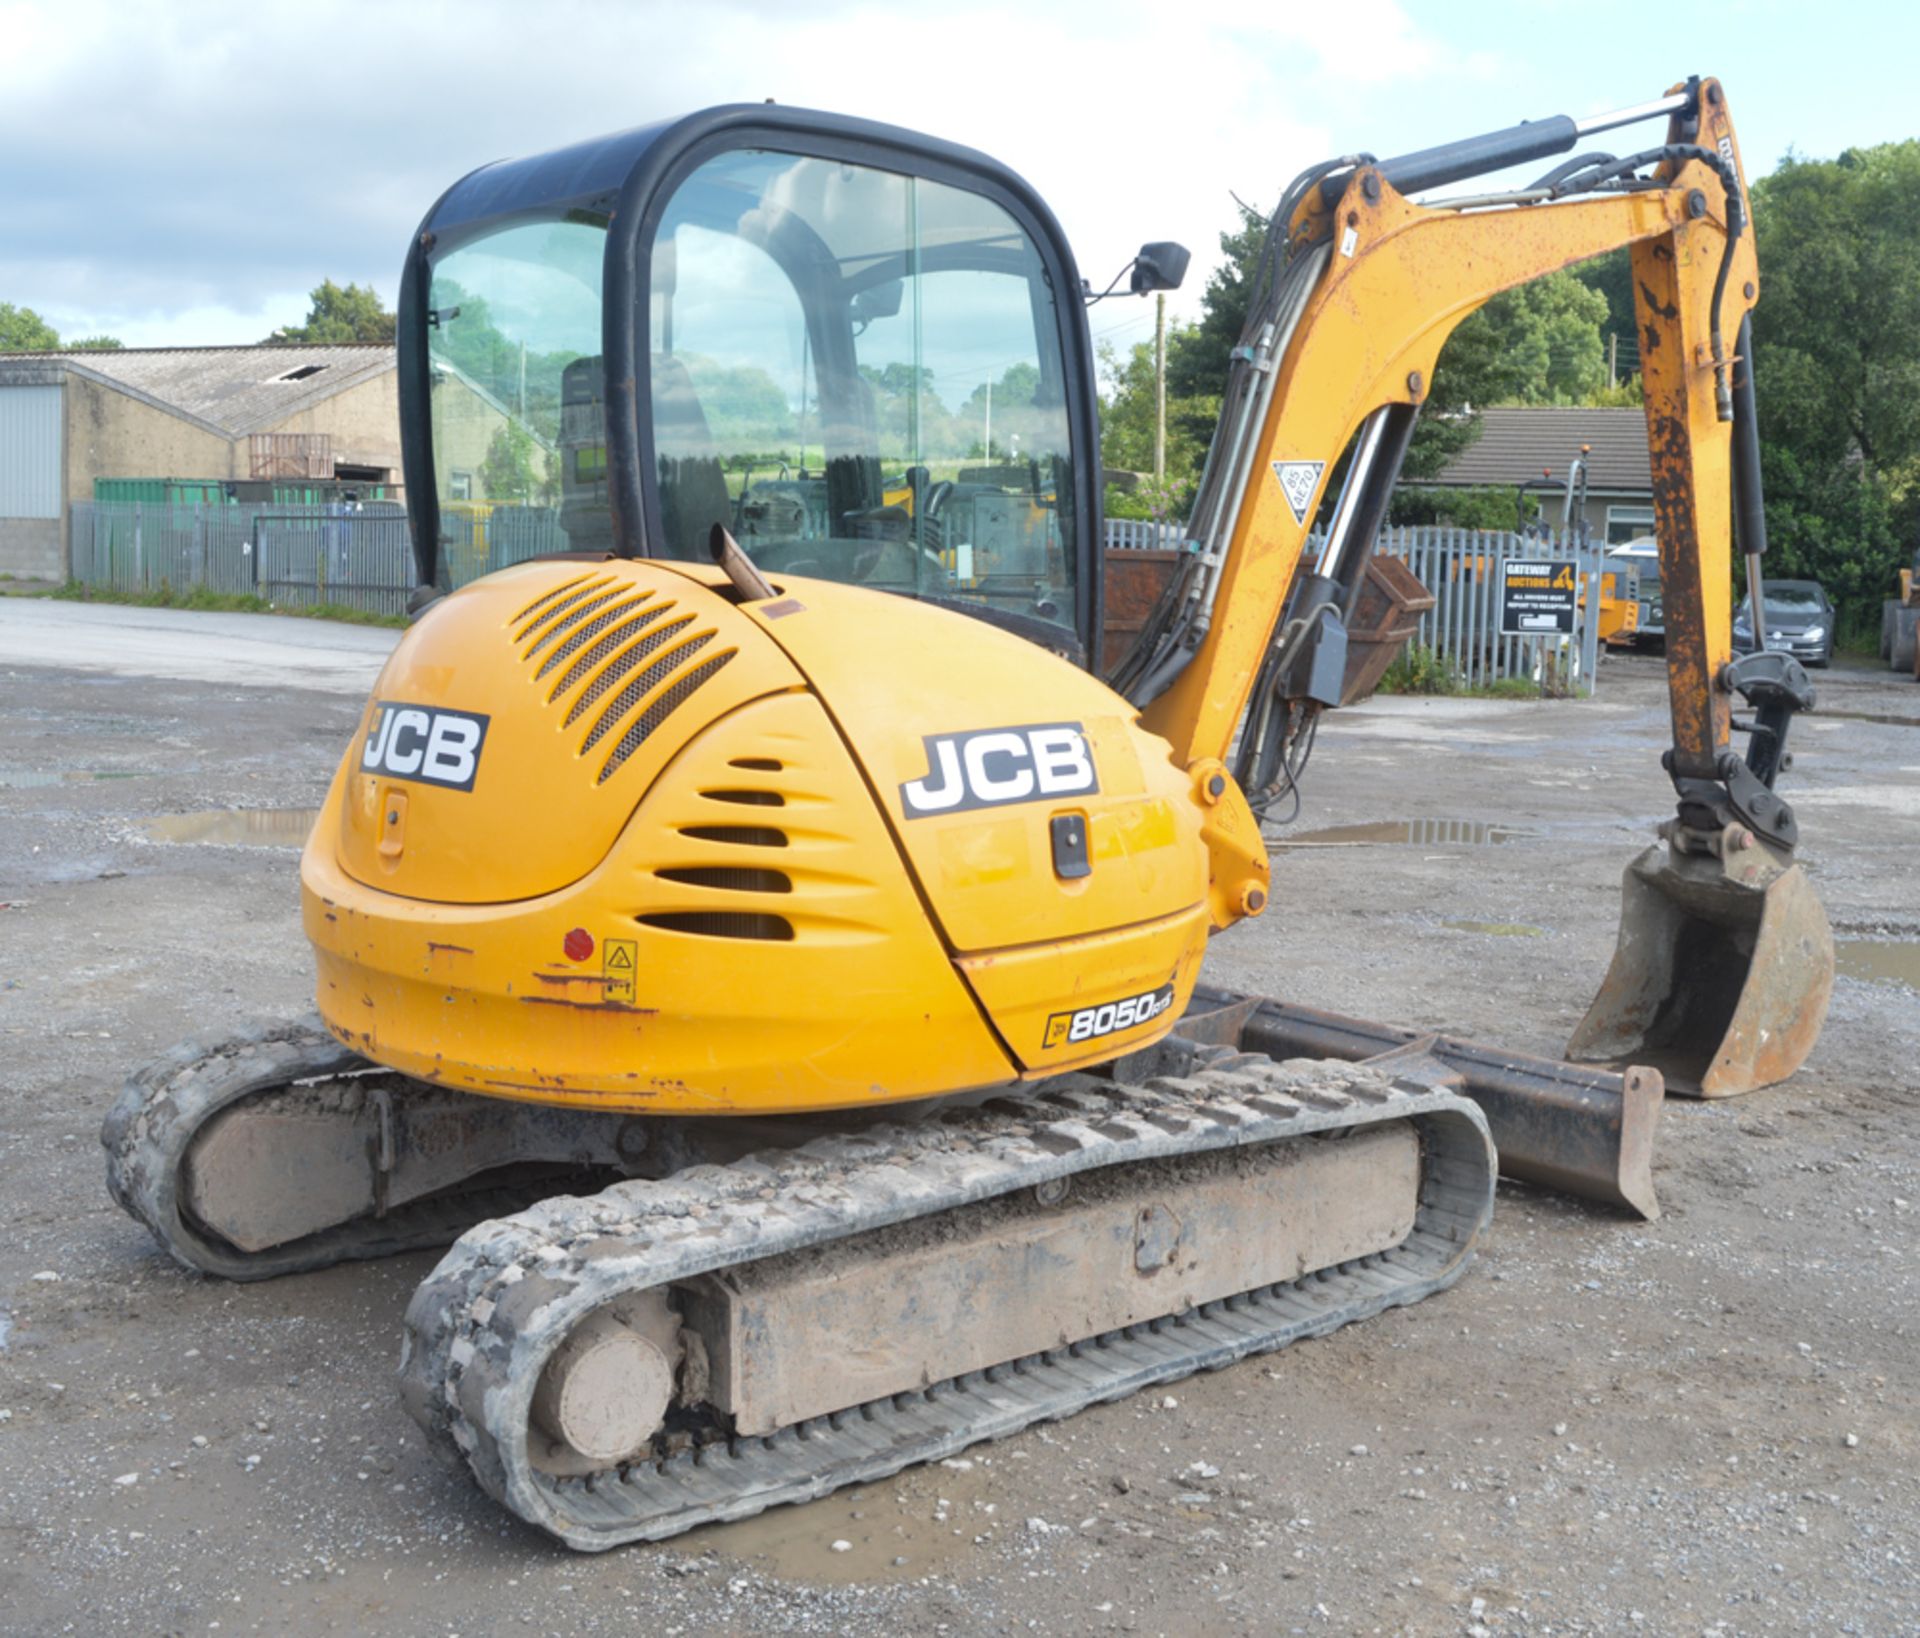 JCB 8050 RTS 5 tonne rubber tracked excavator  Year: 2011 S/N: 01741645 Recorded hours: 2052 - Image 3 of 11